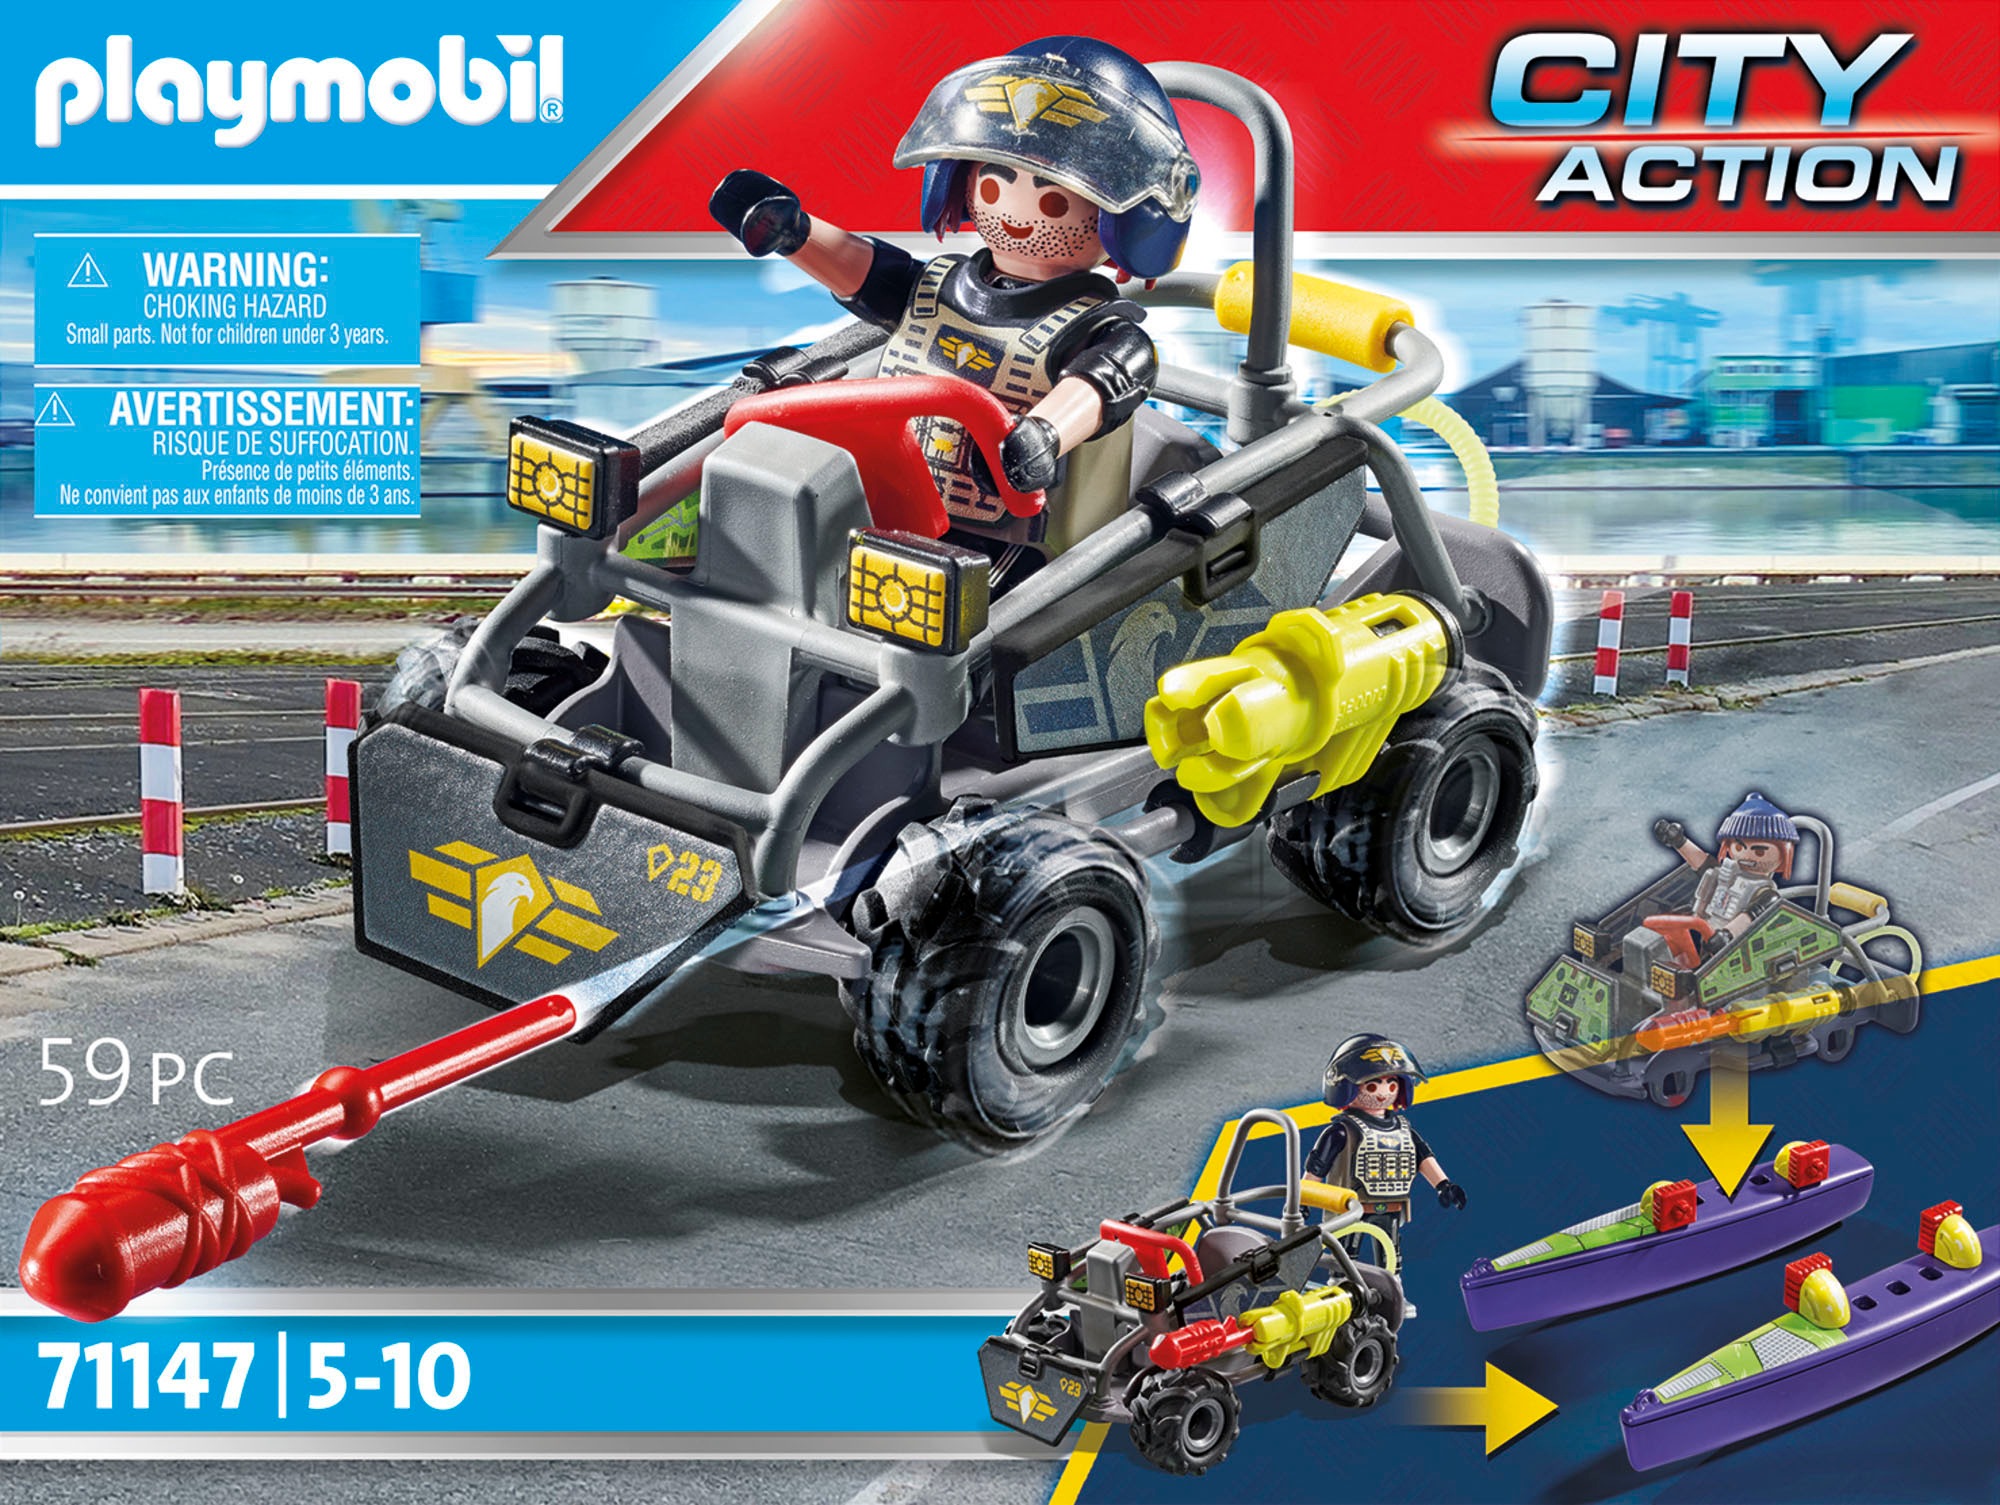 Playmobil® Konstruktions-Spielset »SWAT-Multi-Terrain-Quad (71147), City Action«, (59 St.), Made in Europe